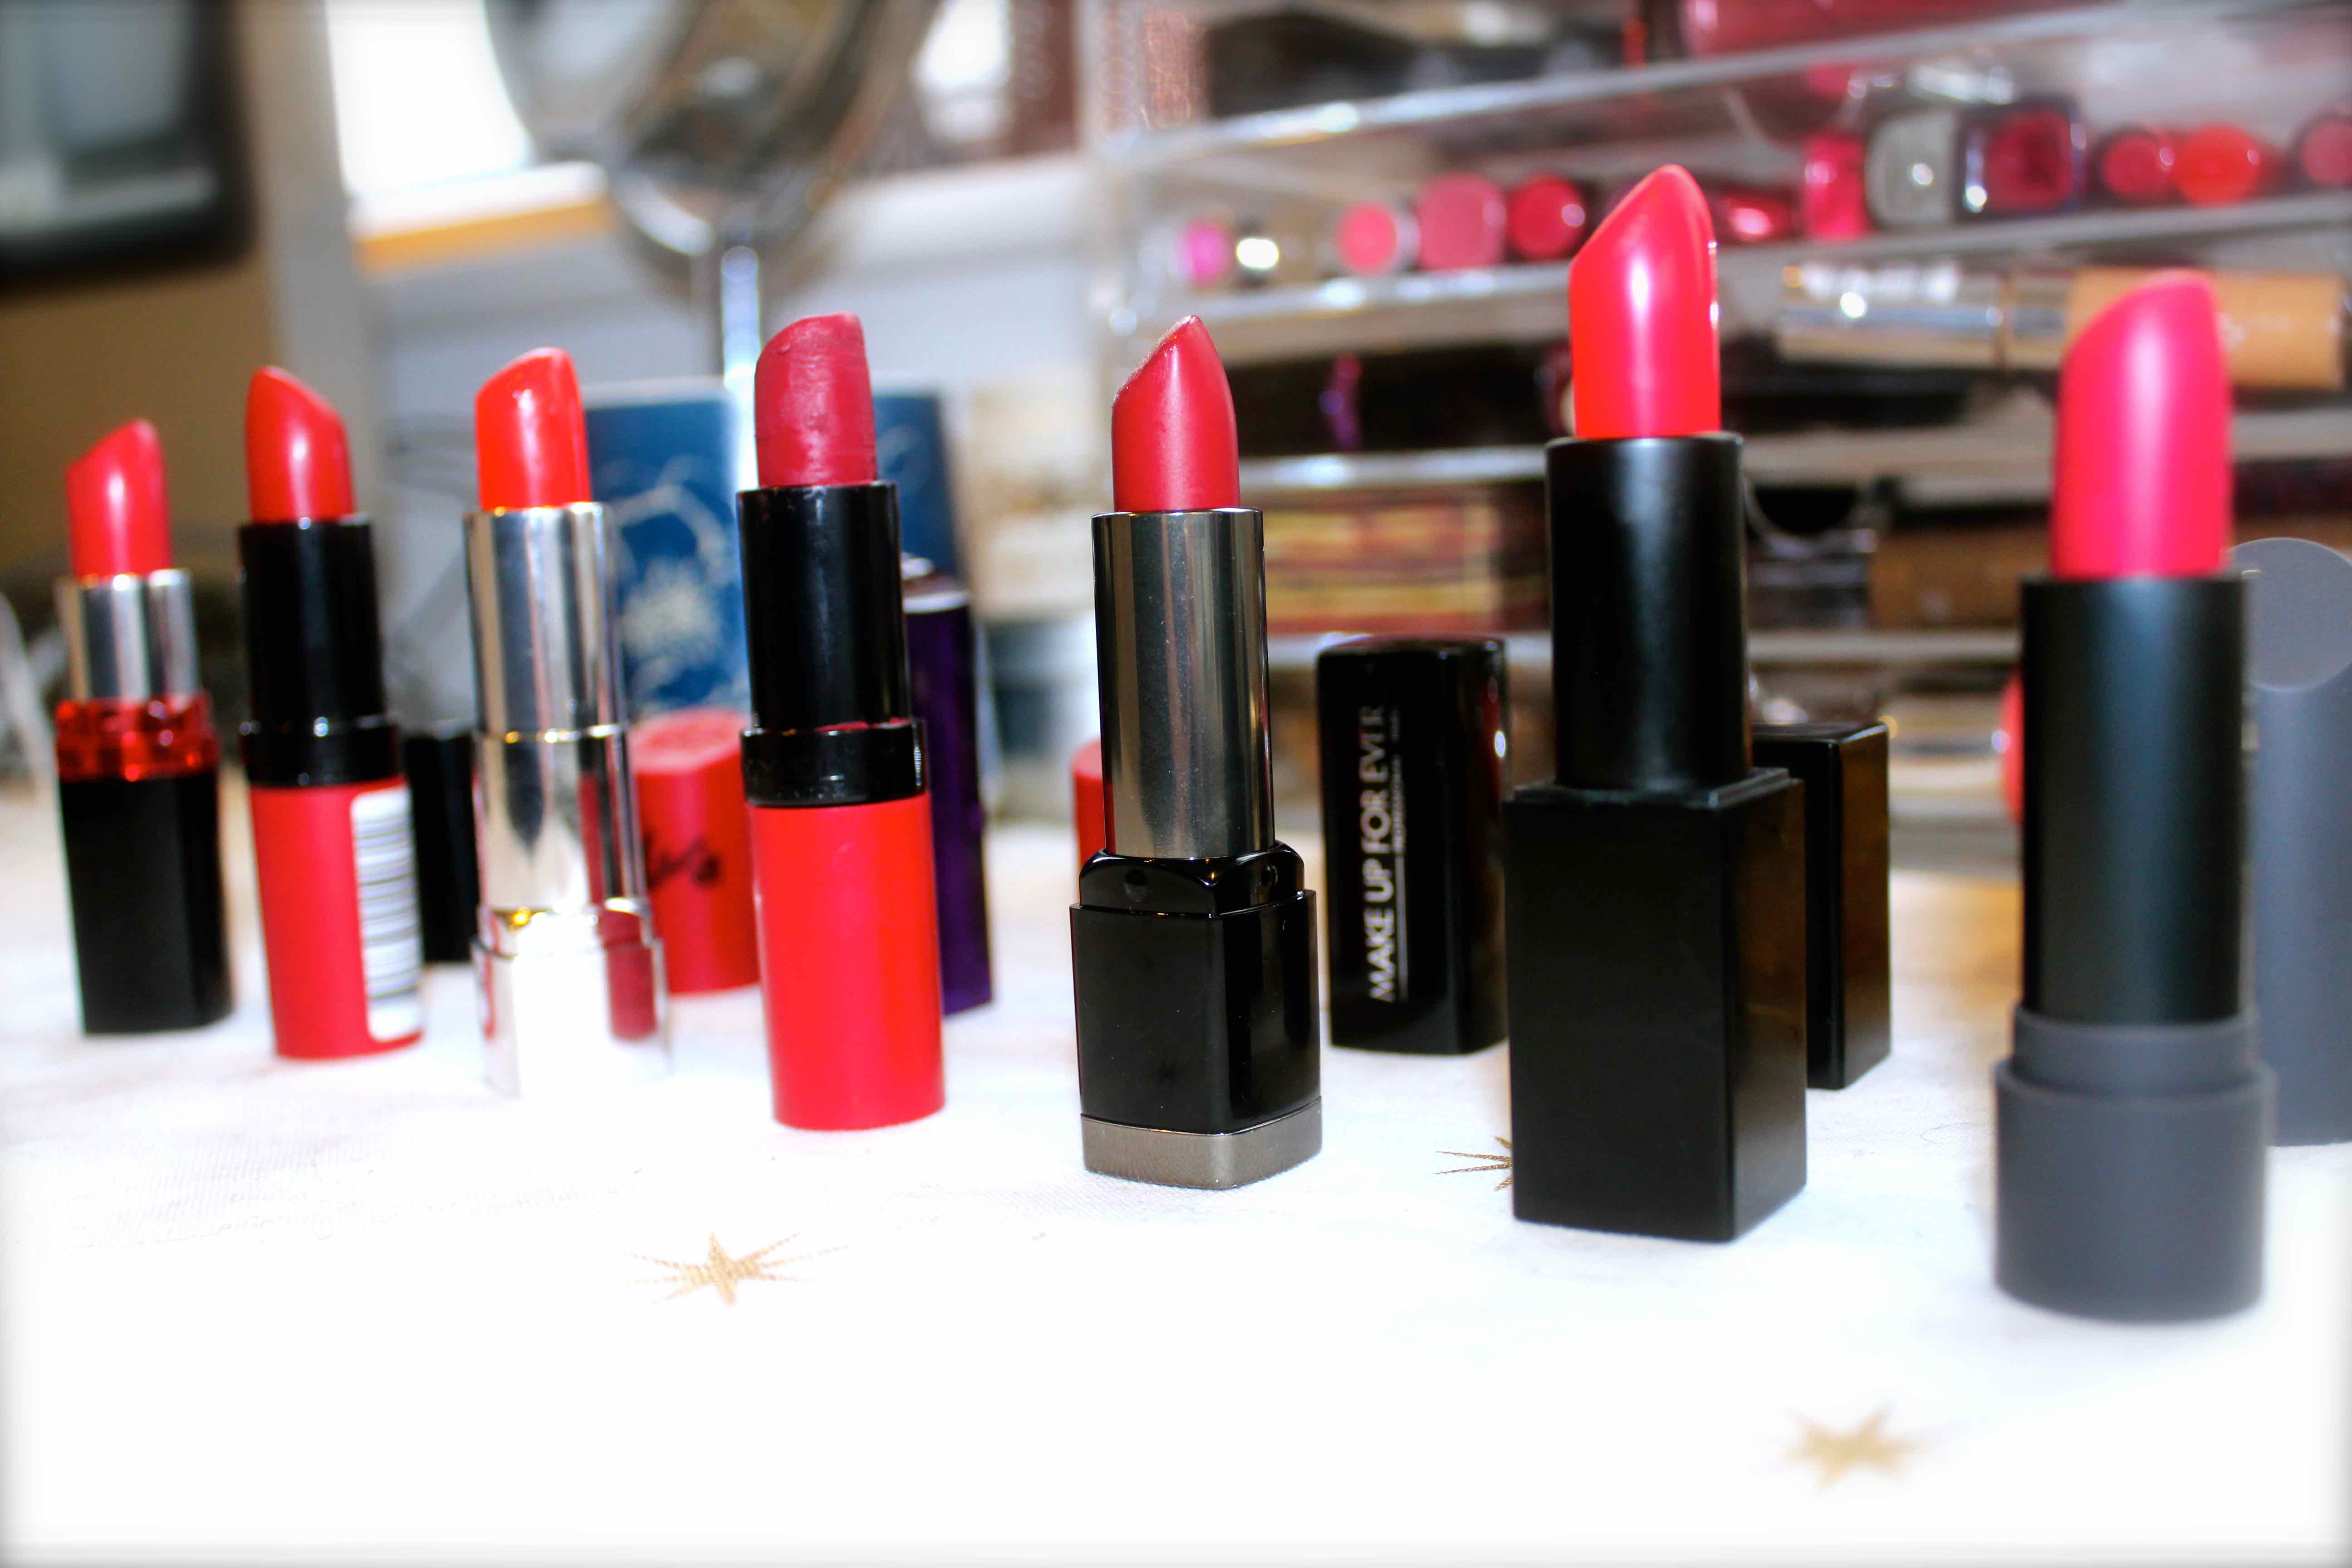 The red lipstick lineup by facemadeup/face made up